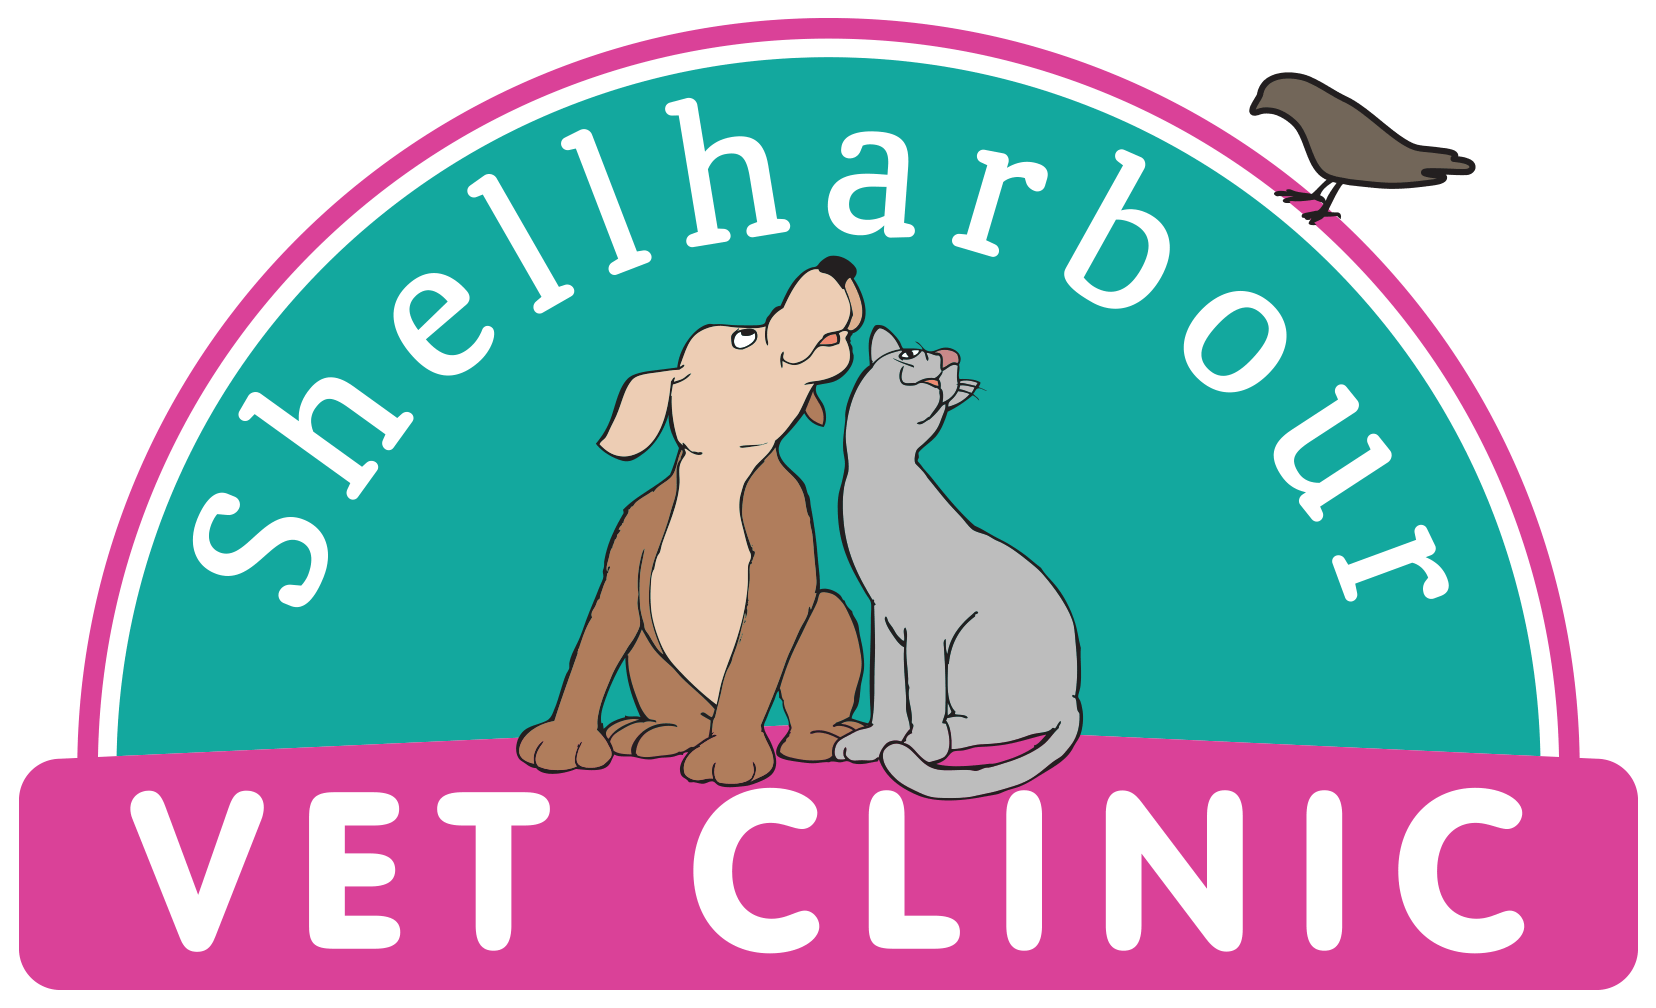 Shellharbour Veterinary Clinic: Your Trusted Vet in Shellharbour